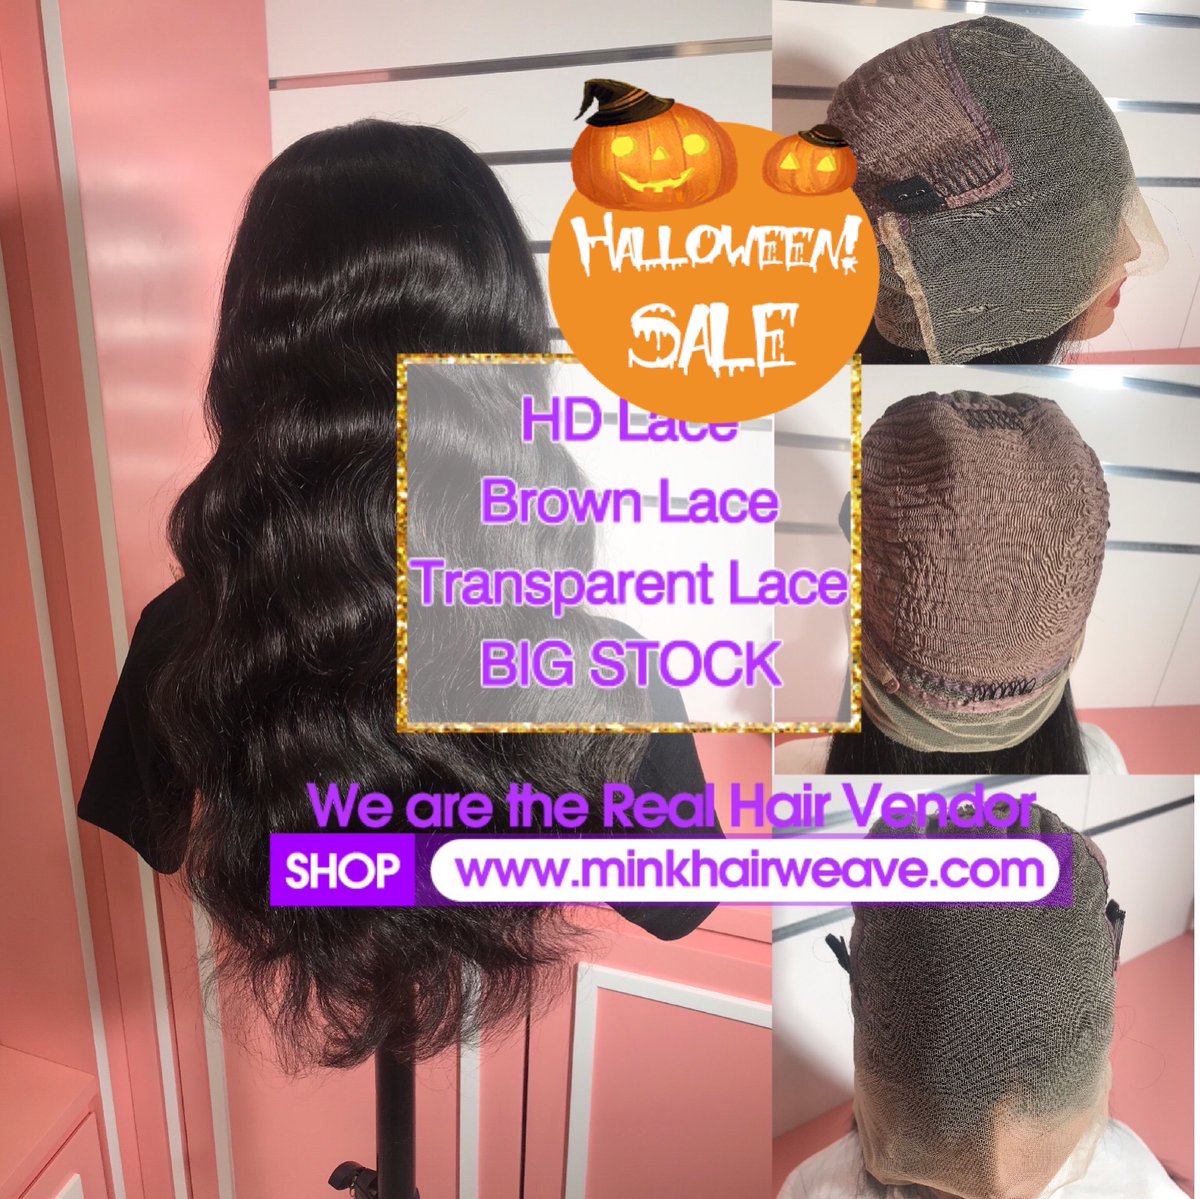 Don’t miss out babe! Halloween hair sale! Up to 50% Off! Hope you guys are having as much fun this Halloween as we are!
#silkystraighthair #613bundles #bobwigs #hairtutorialvideo #sewinspecials #halloweenwigs #halloweenclosure #halloweenbag #halloweenbonnet #tampawigclass